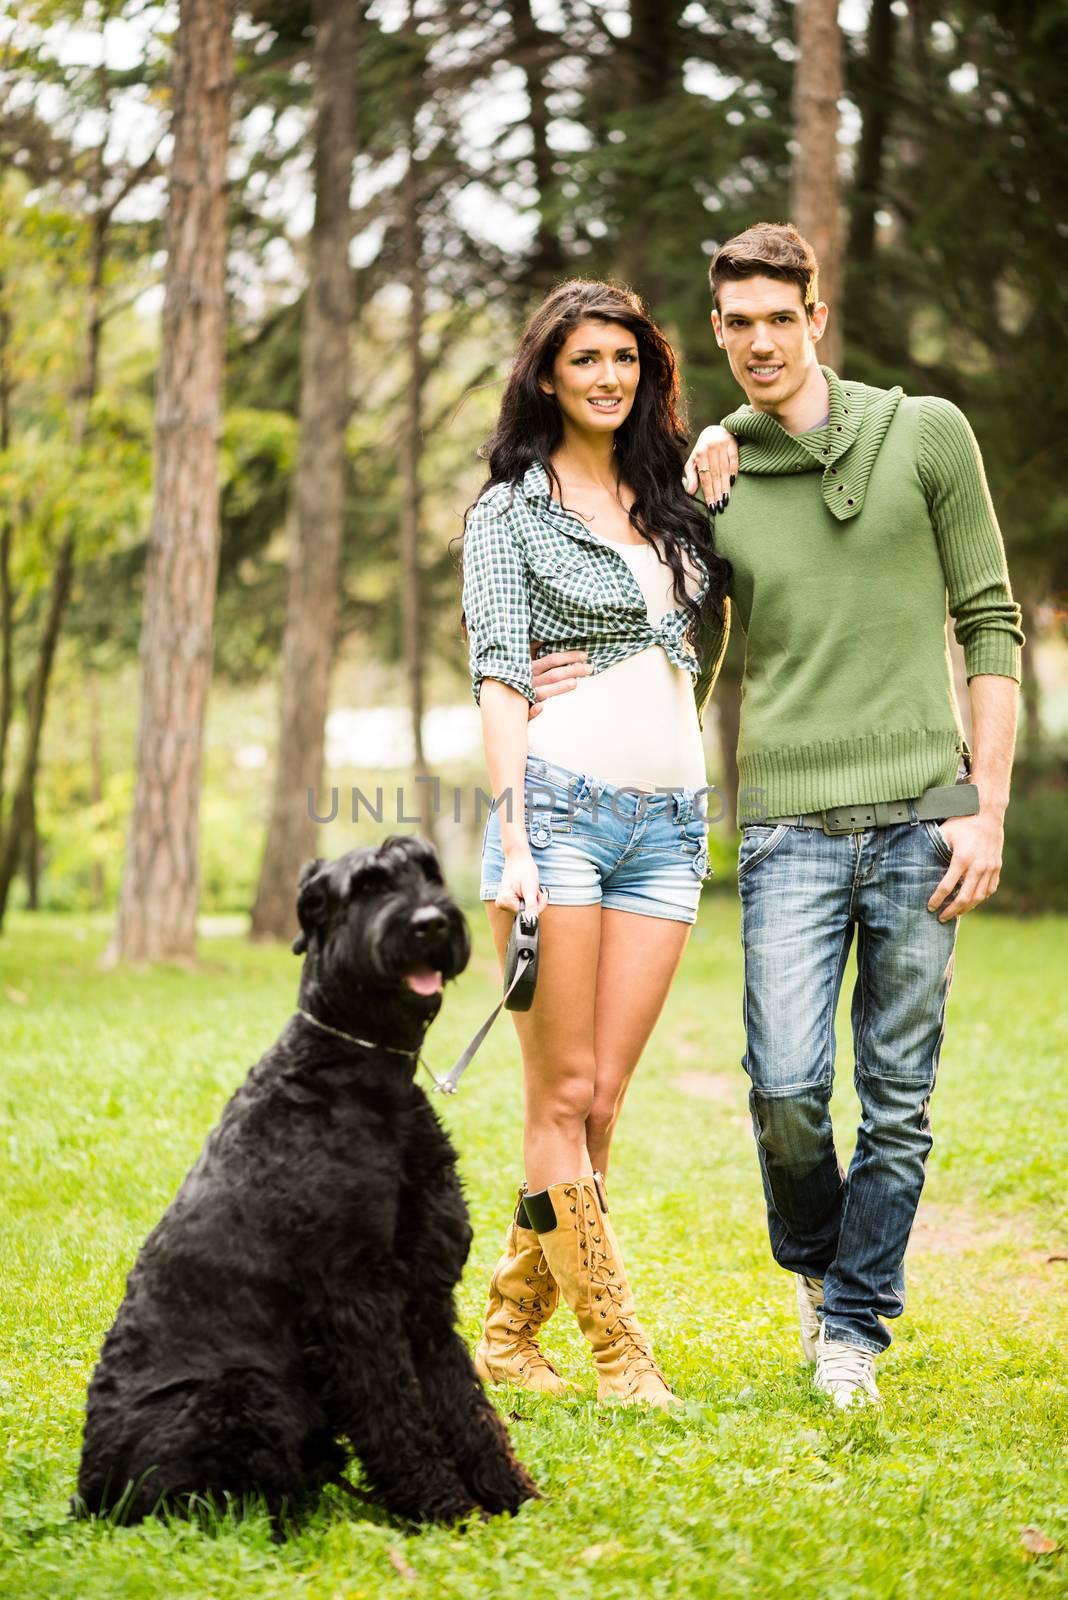 Handsome Couple With Dog by MilanMarkovic78